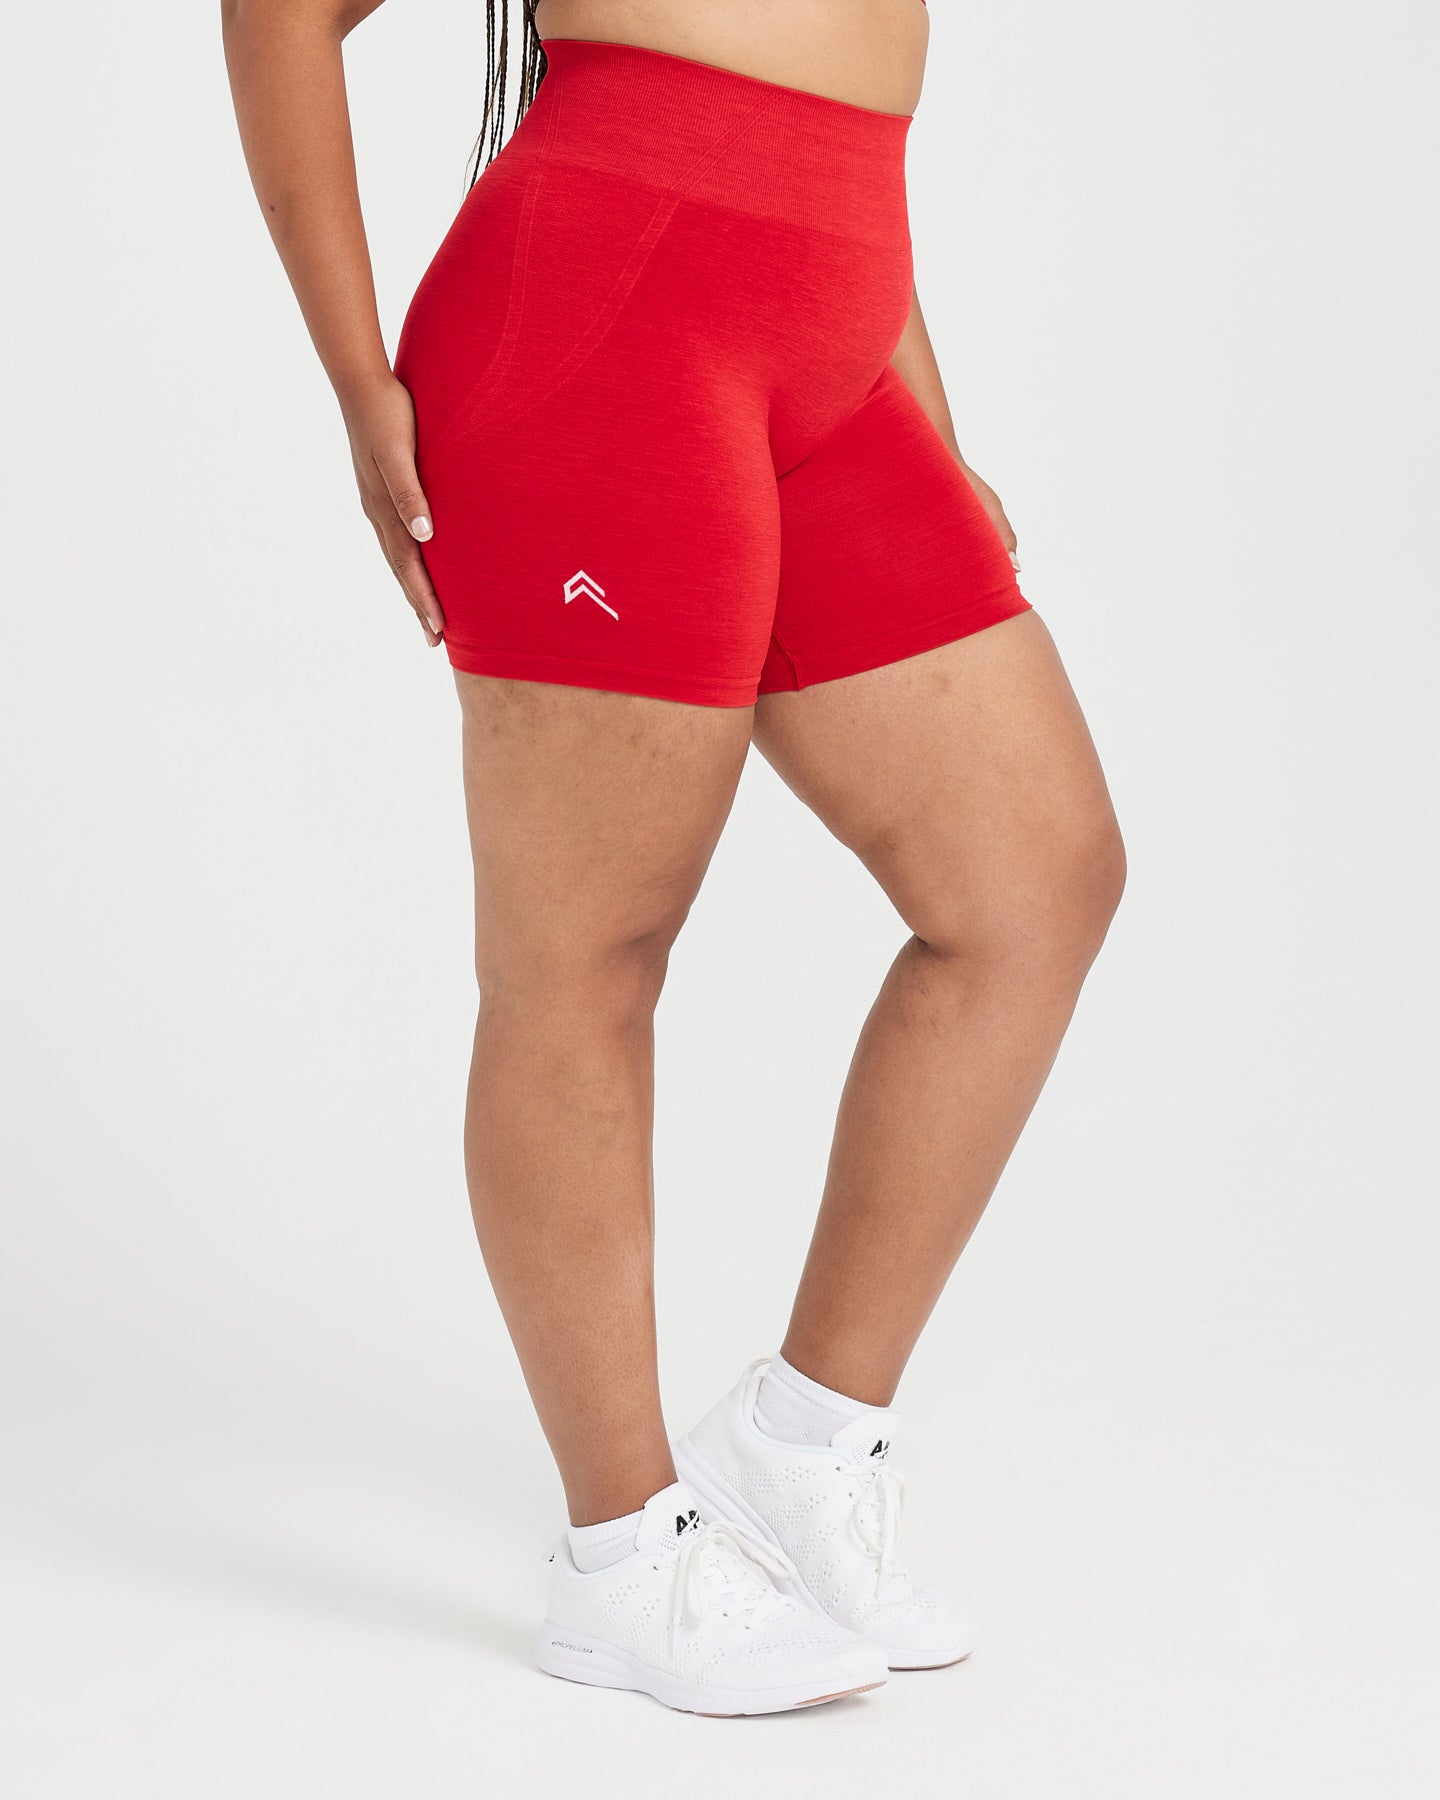 Red Shorts – special offers for women at